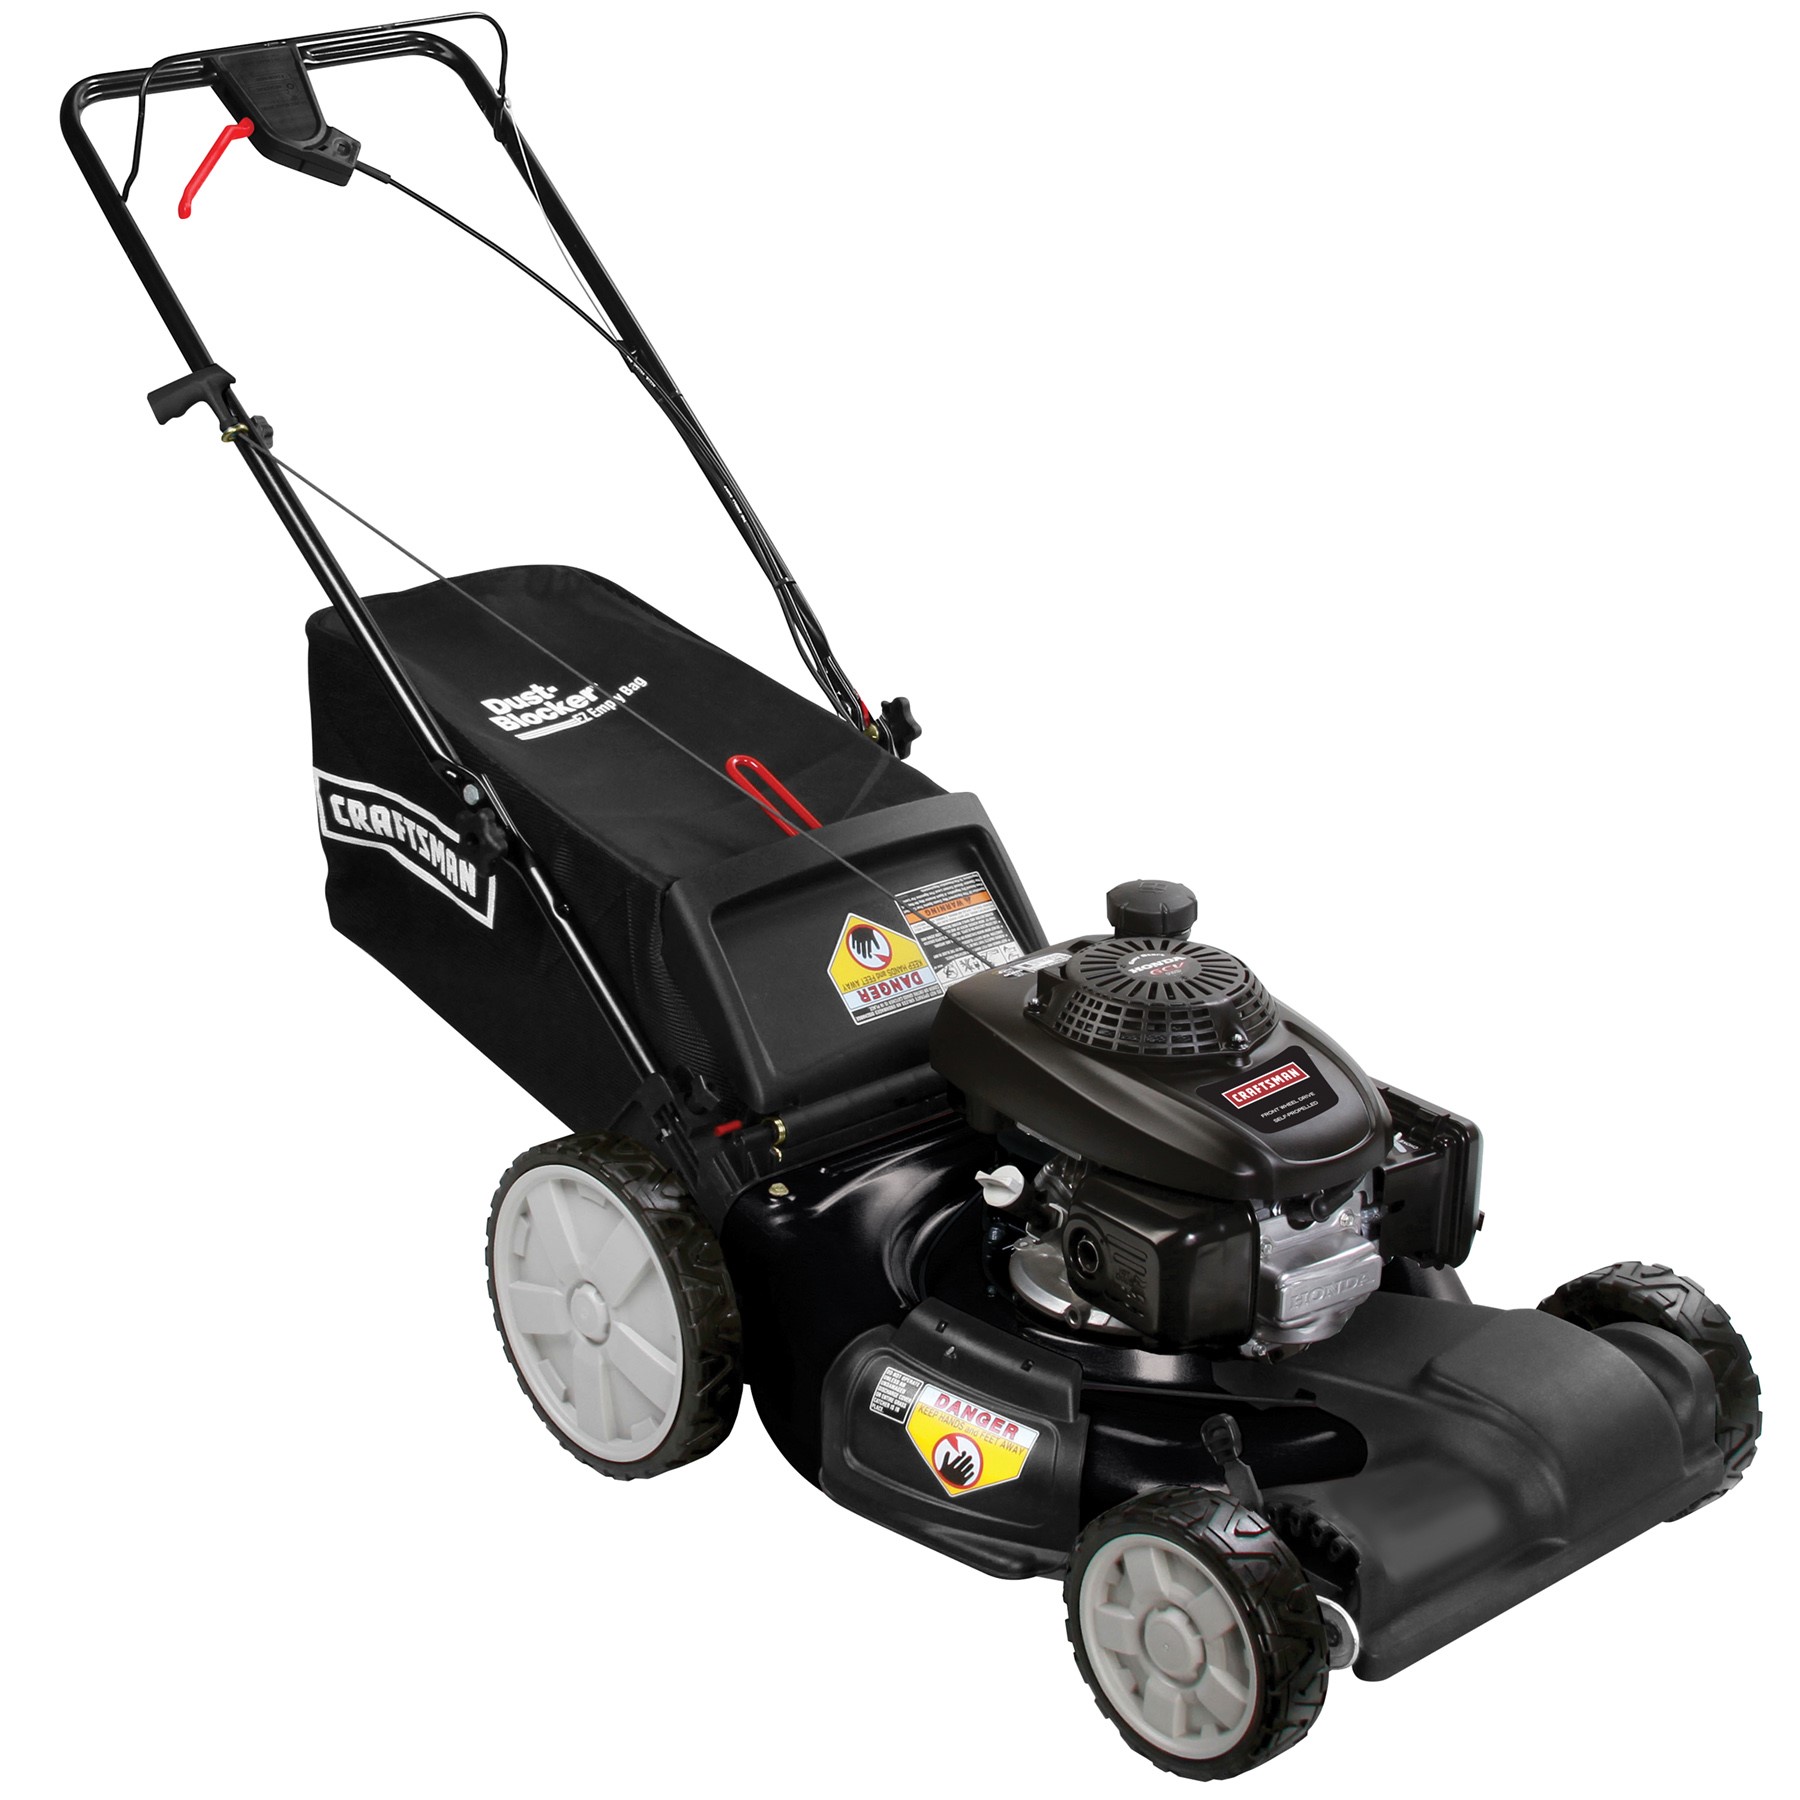 Craftsman 37747 21" 160cc FrontWheel Drive Lawn Mower with High Rear Wheels Shop Your Way